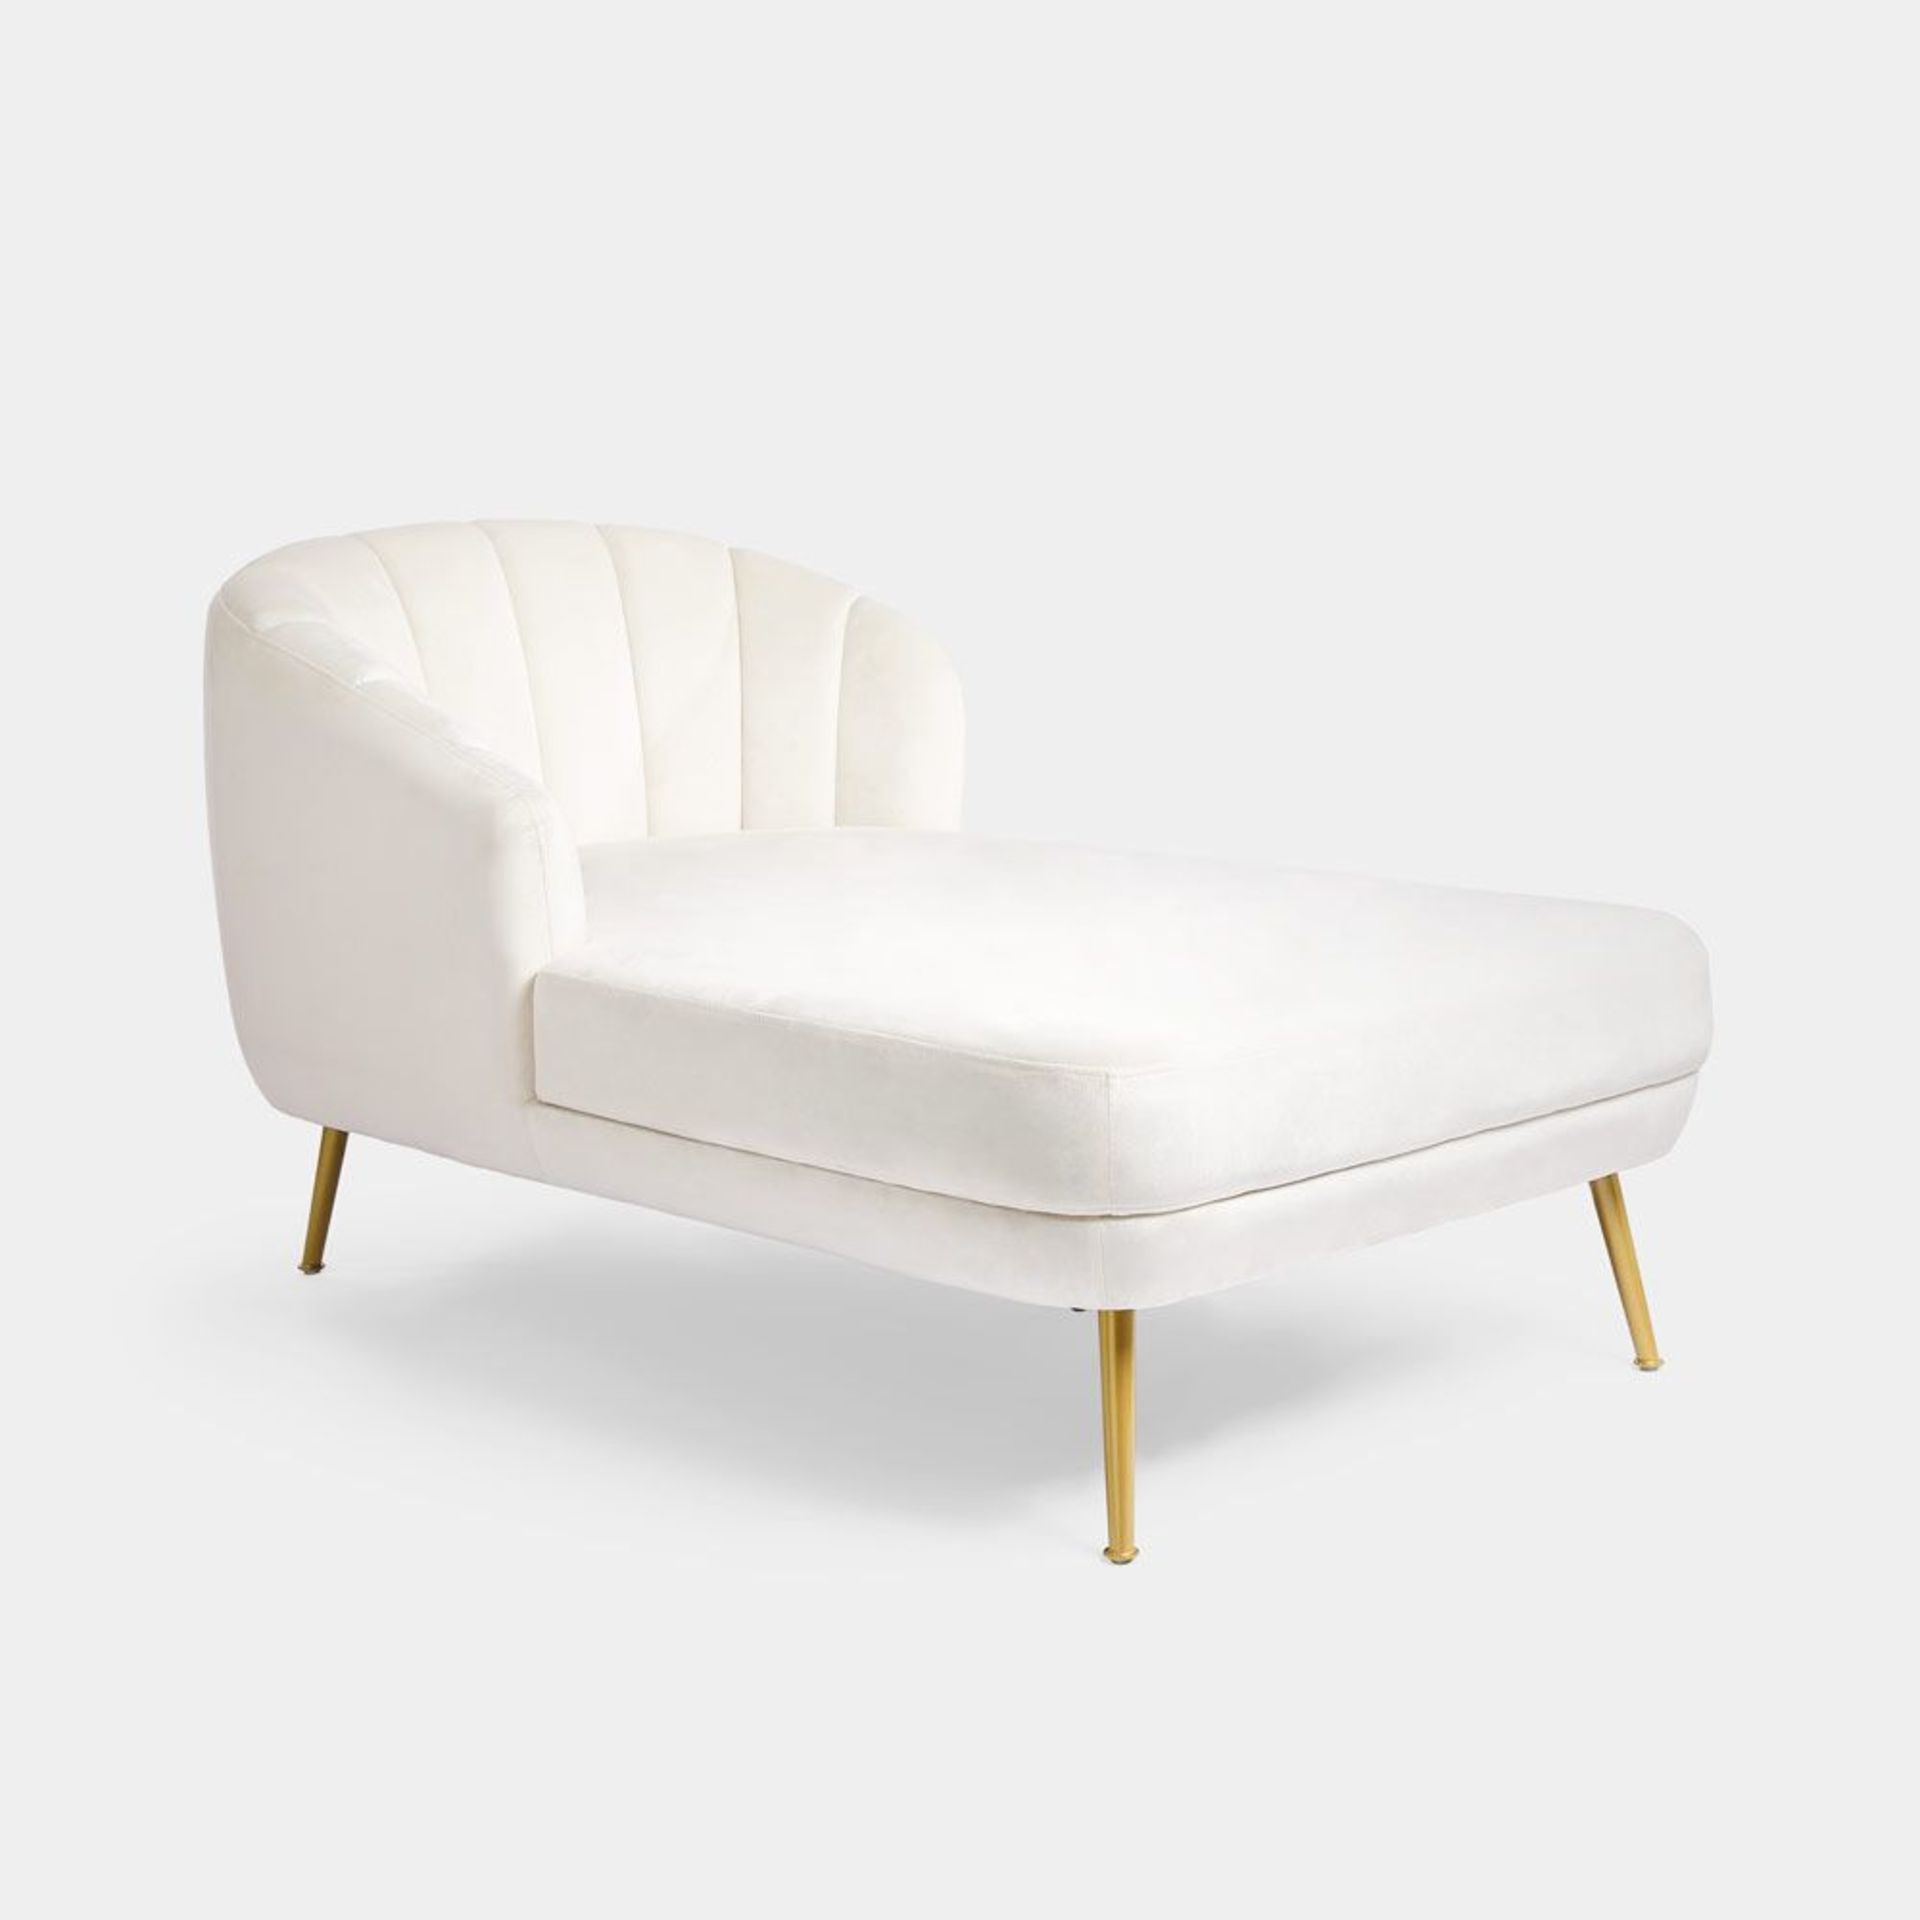 Cream Velvet Chaise Longue with Metal Legs. RRP £449.99. (REF323) (J/ST)Offering spacious, - Image 2 of 2